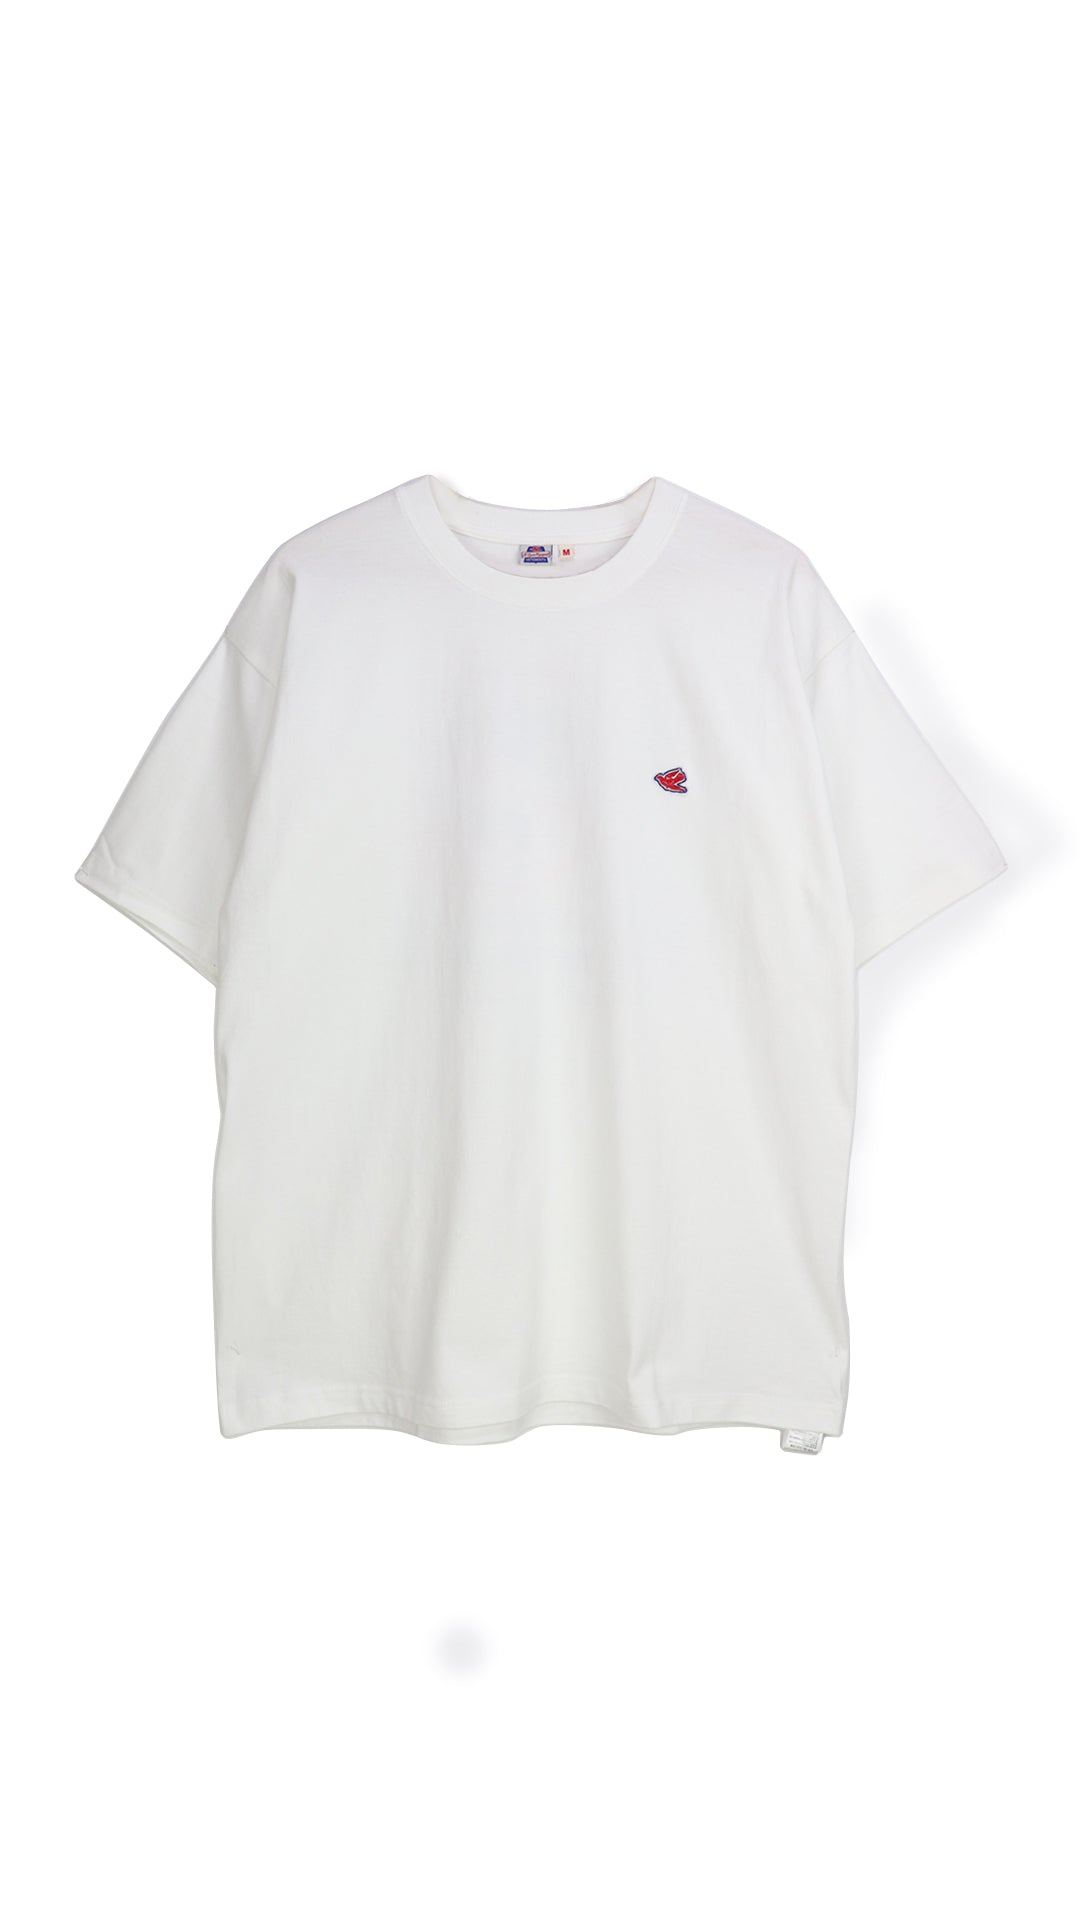 PIGEON GRAPHIC T-SHIRTS -VERTICAL ver.-